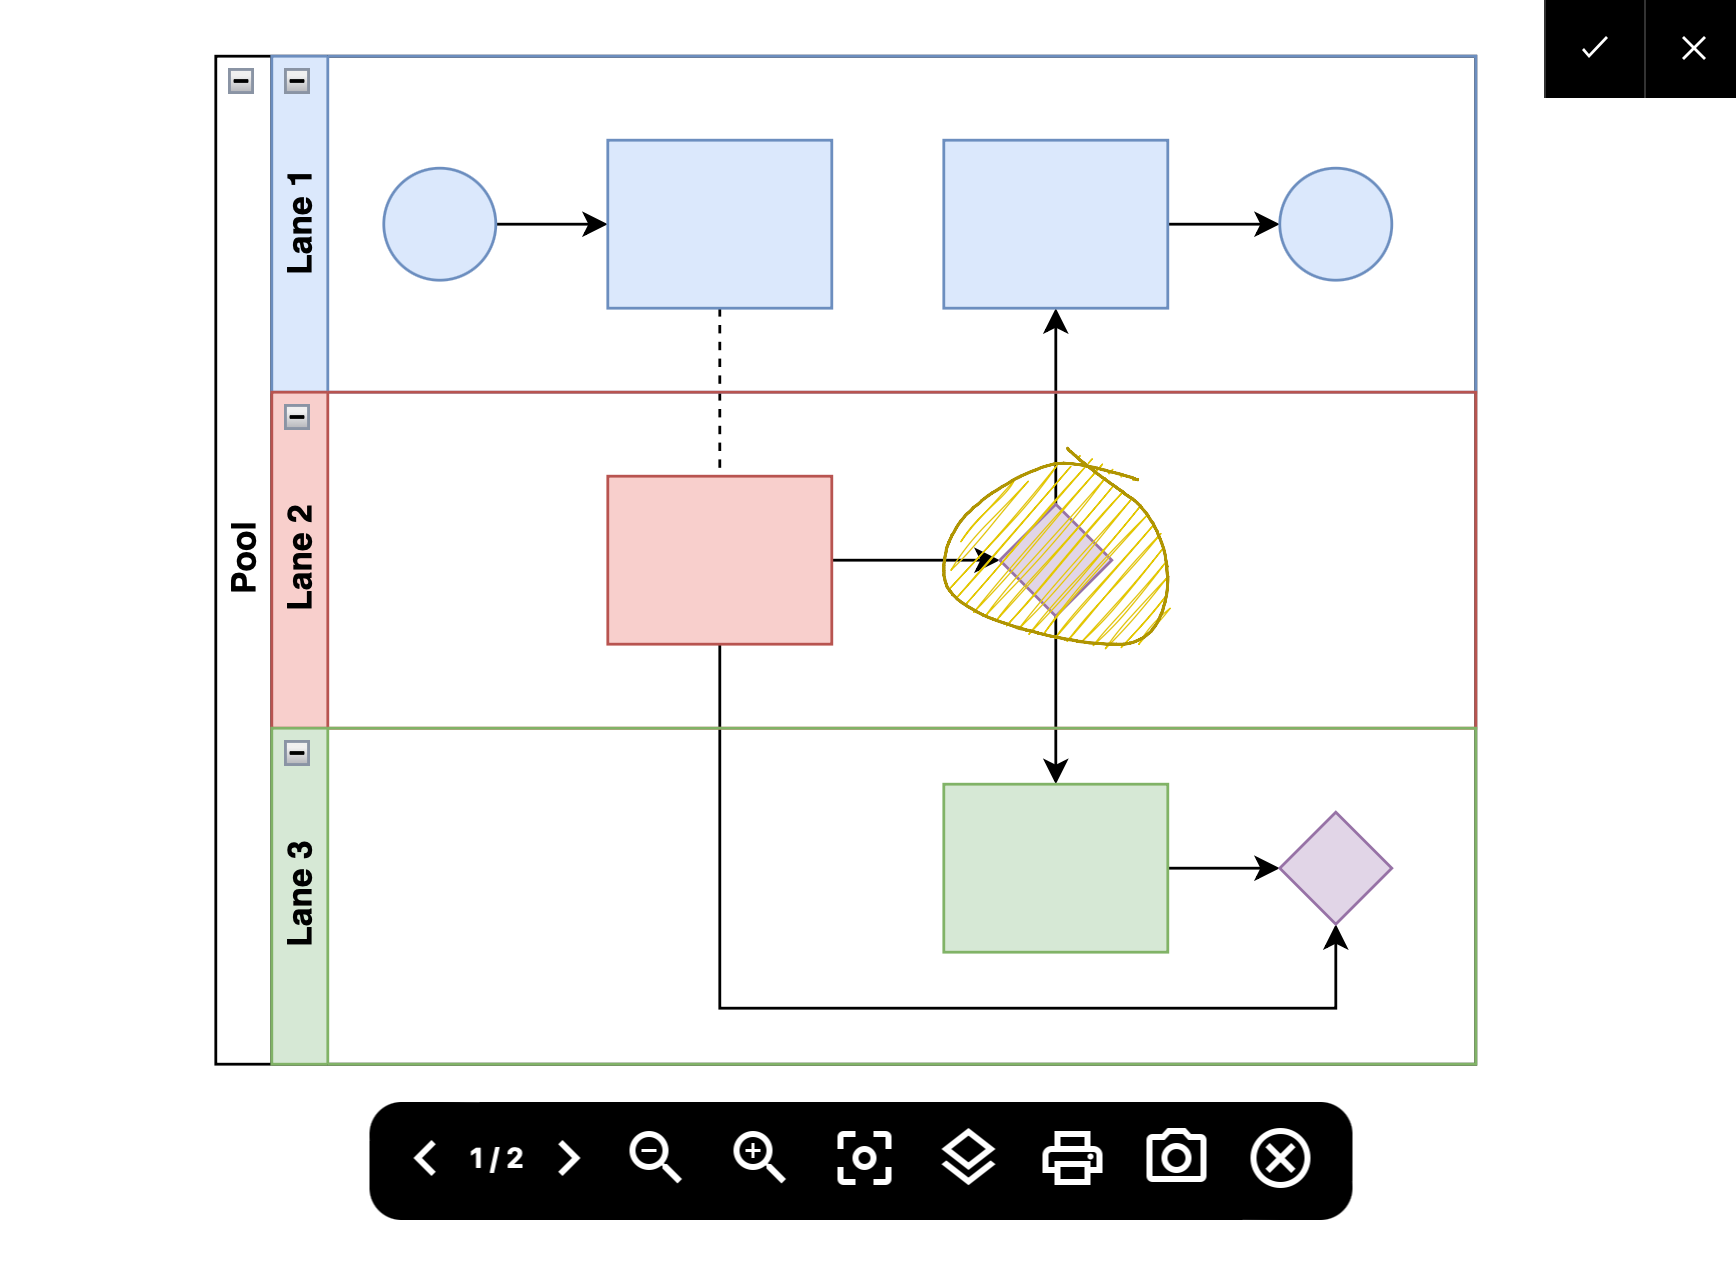 View a draw.io diagram attached to a Jira Cloud issue in the lightbox viewer